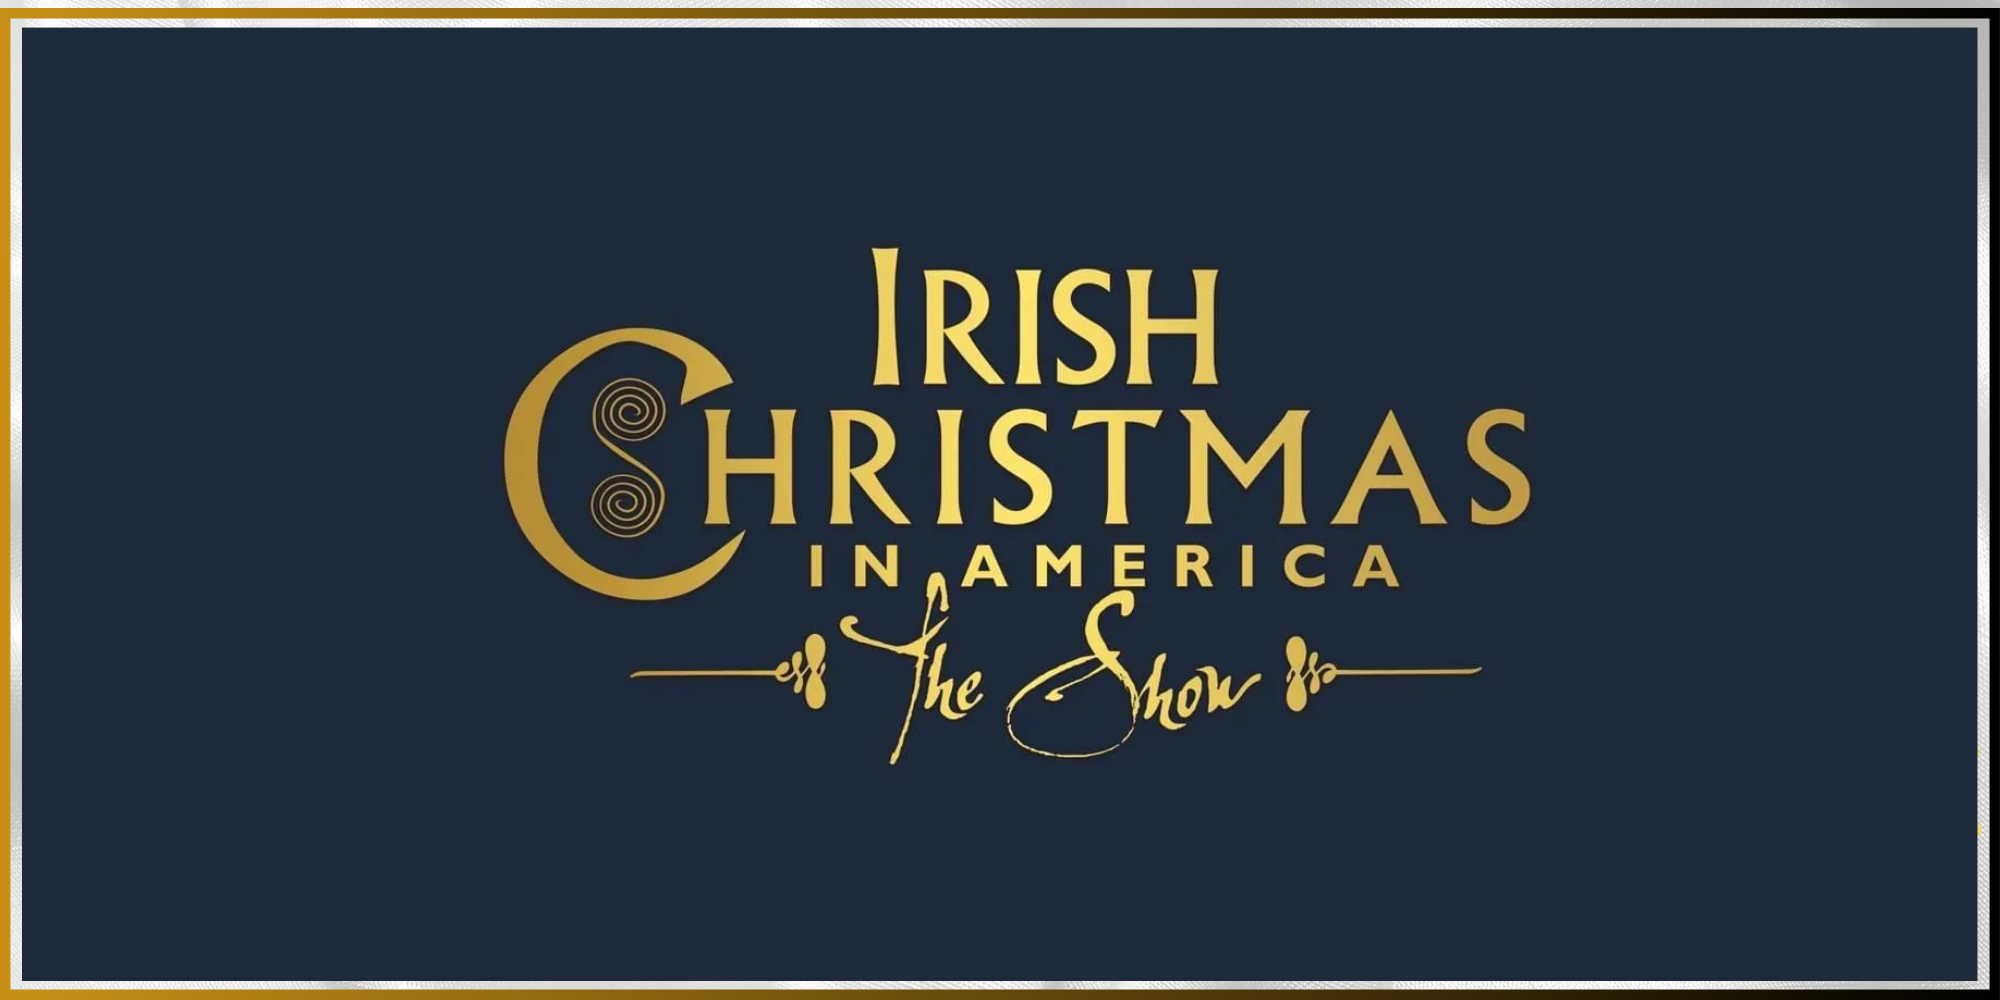 "Irish Christmas in America The Show" in a celtic font on a blue background